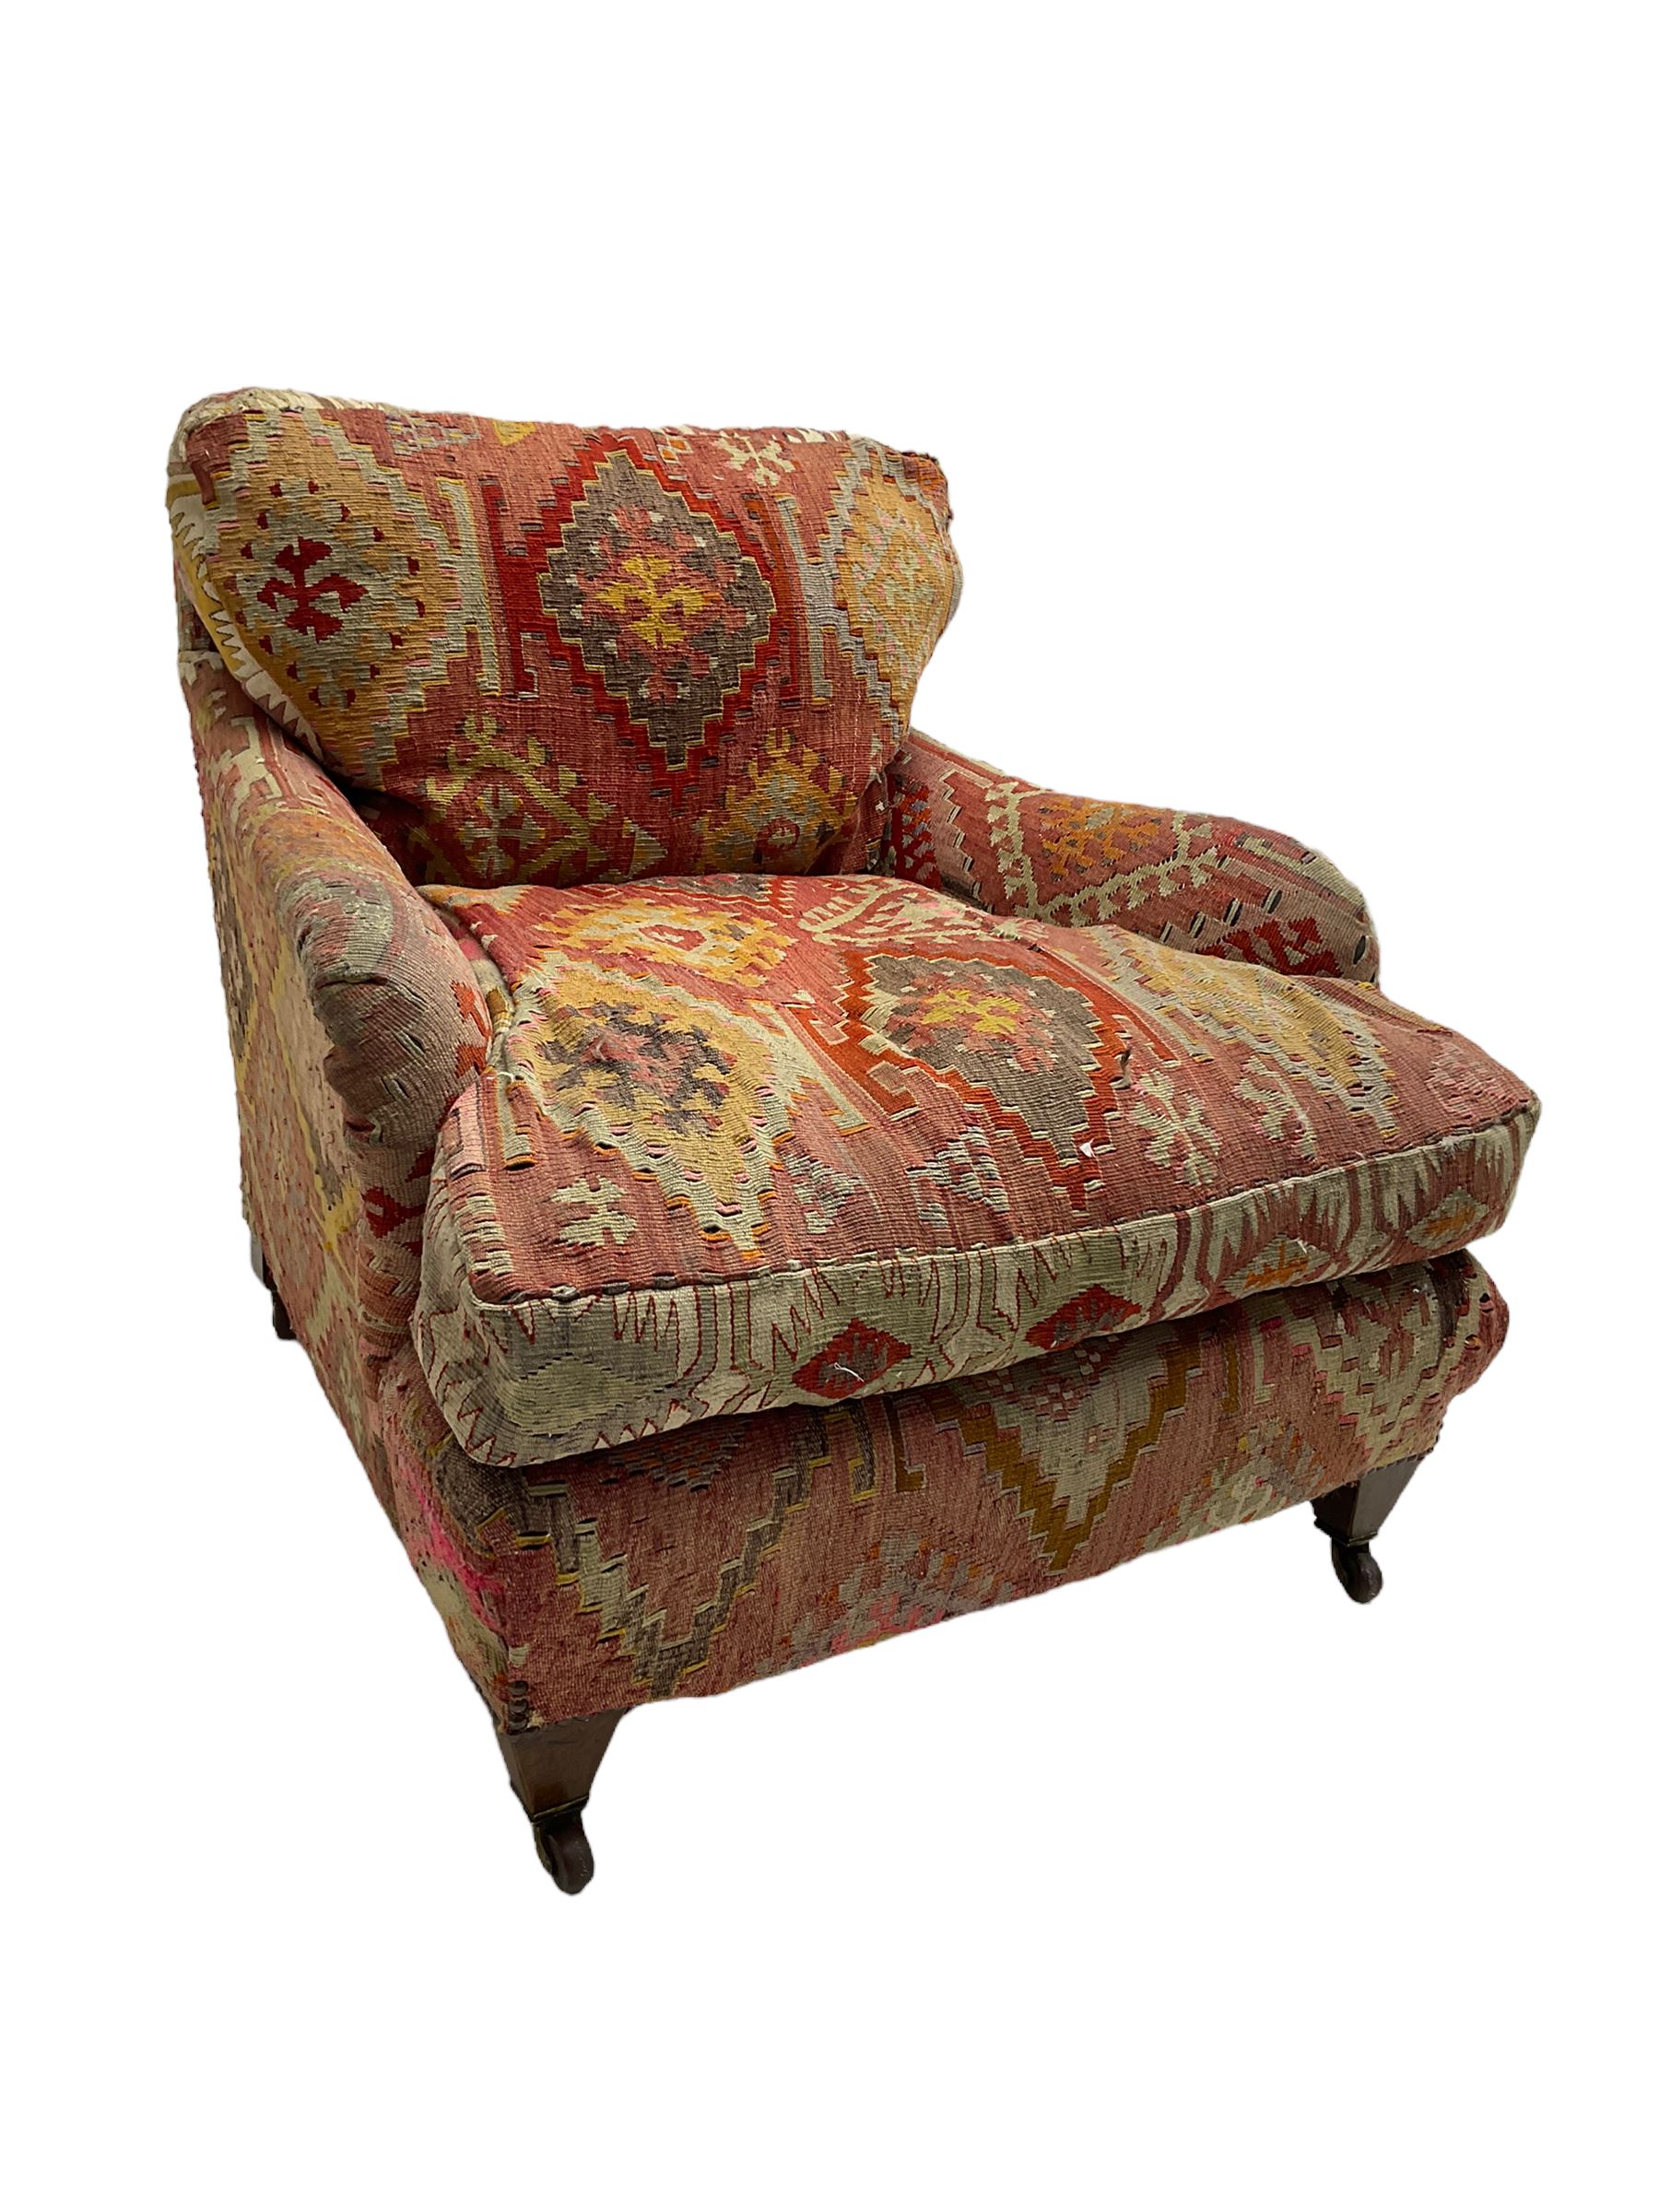 Early 20th century Howard style armchair - Image 4 of 5